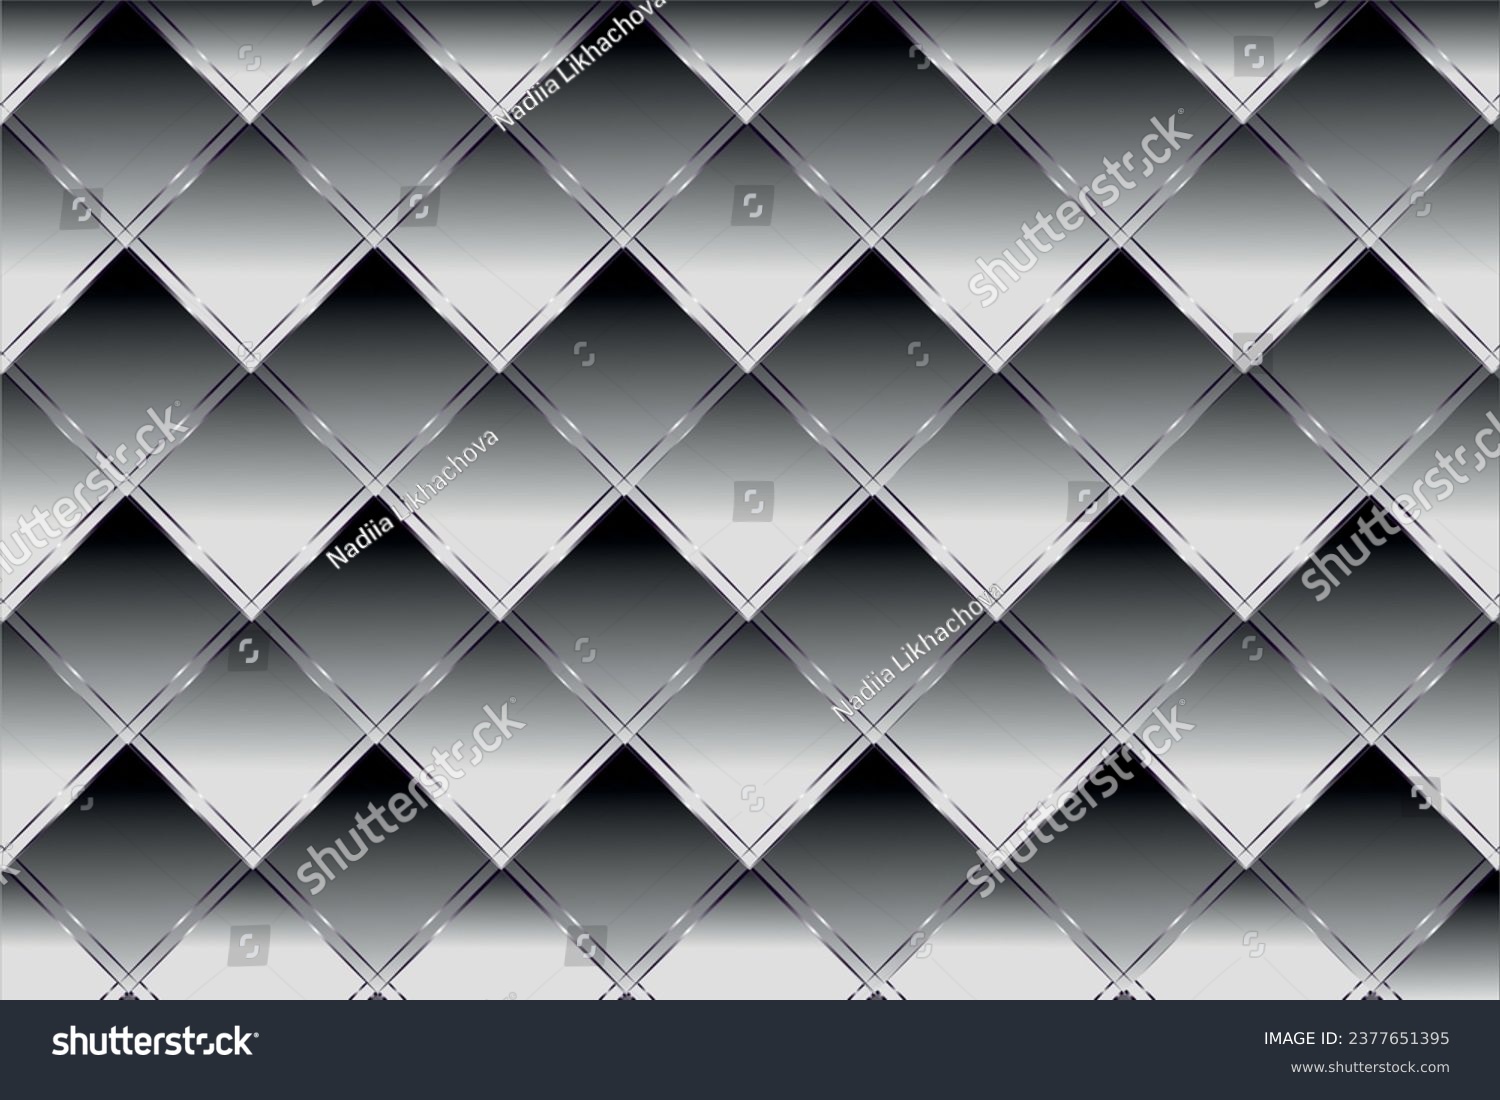 SVG of Gray premium background with luxurious dark and light patterned quads and silver lines. The gradient creates luxurious silver platinum lines. Rich background for premium design. Vector illustration. svg